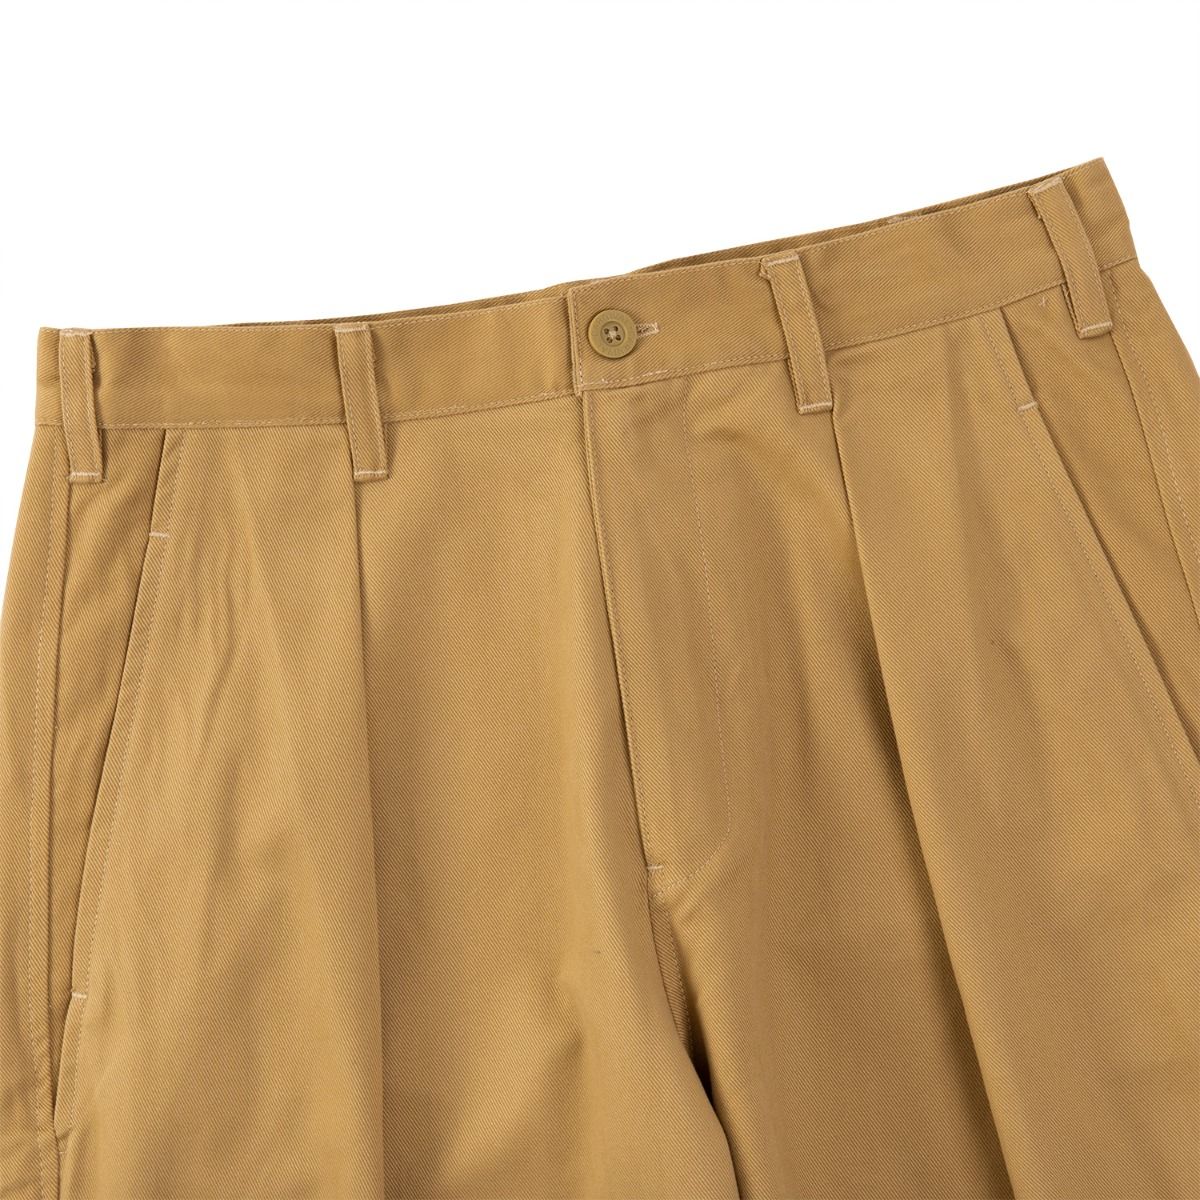 CARNIVAL SS22 UNCLE PANTS BROWN